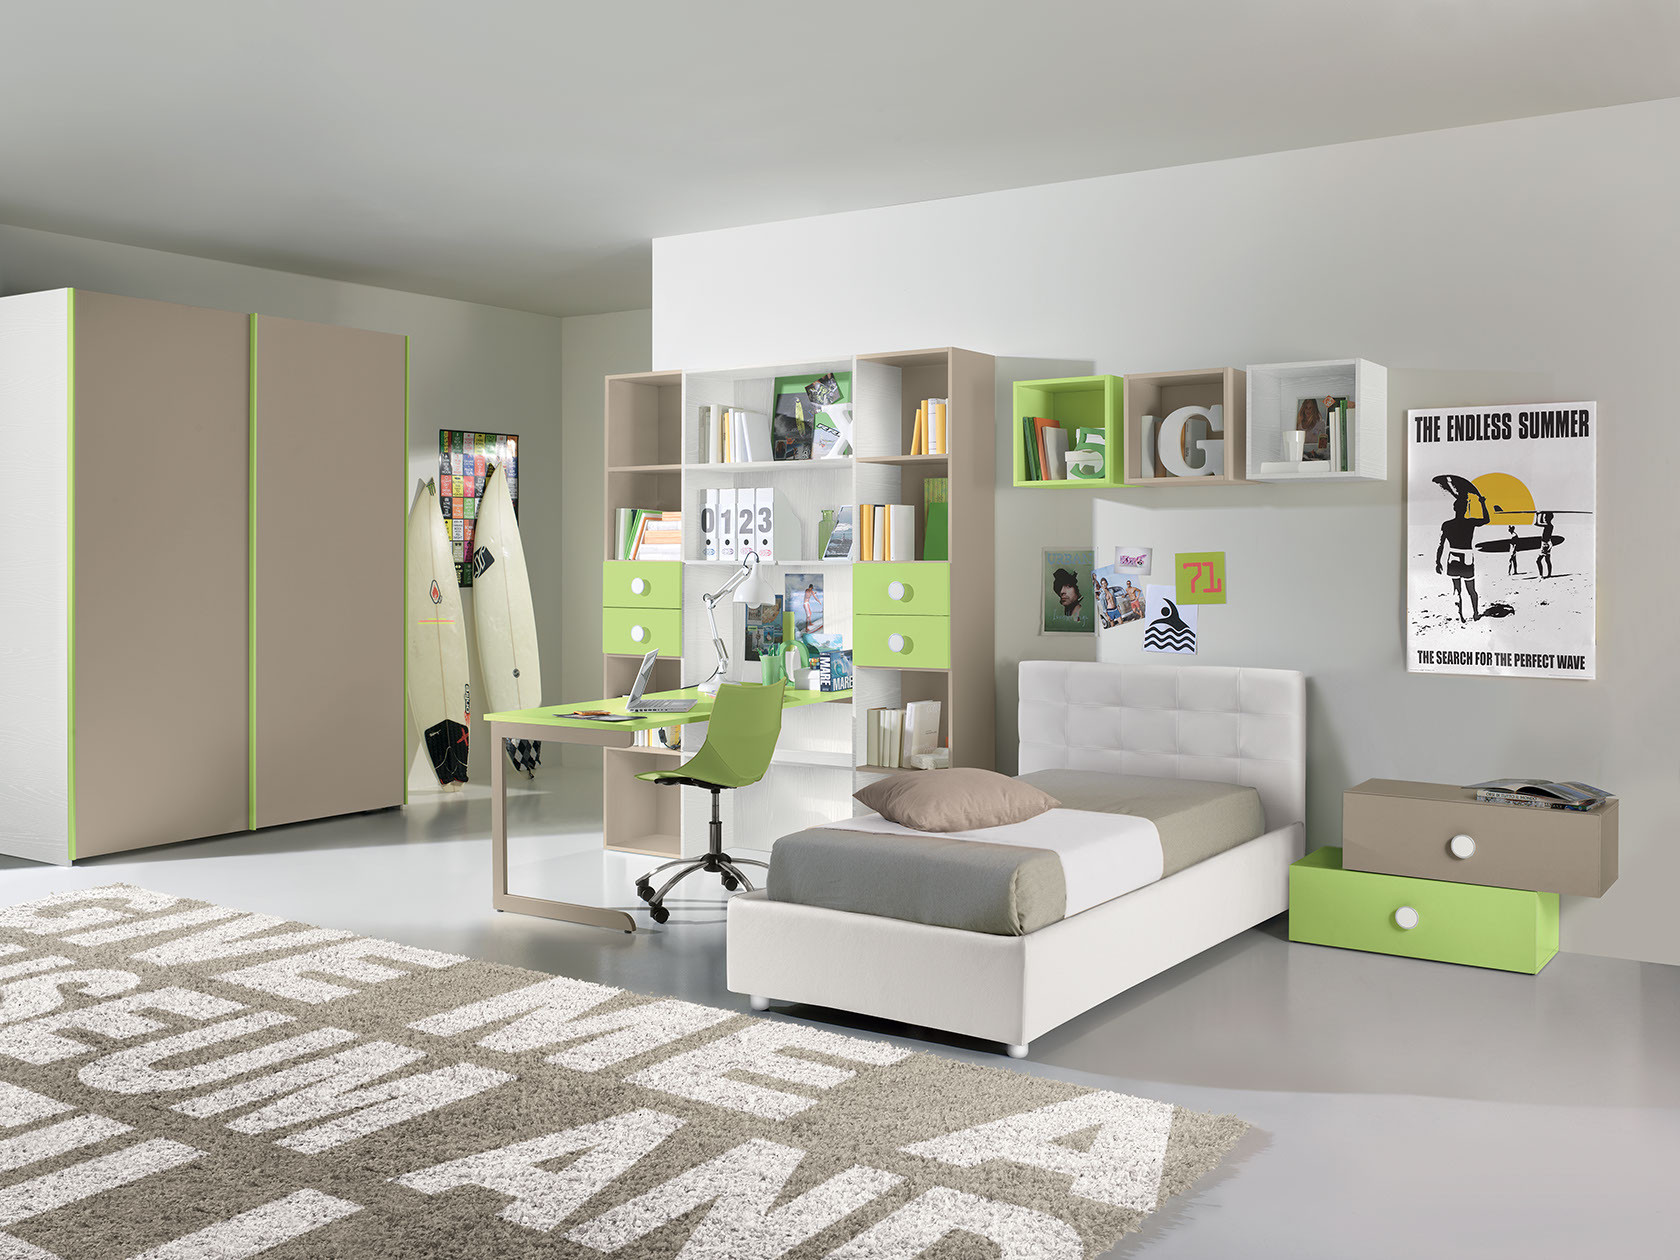 Modern Computer Desk Bedroom Ideas And Photos Houzz Today, we are going to talk about tiny bedrooms, how to work. modern computer desk bedroom ideas and